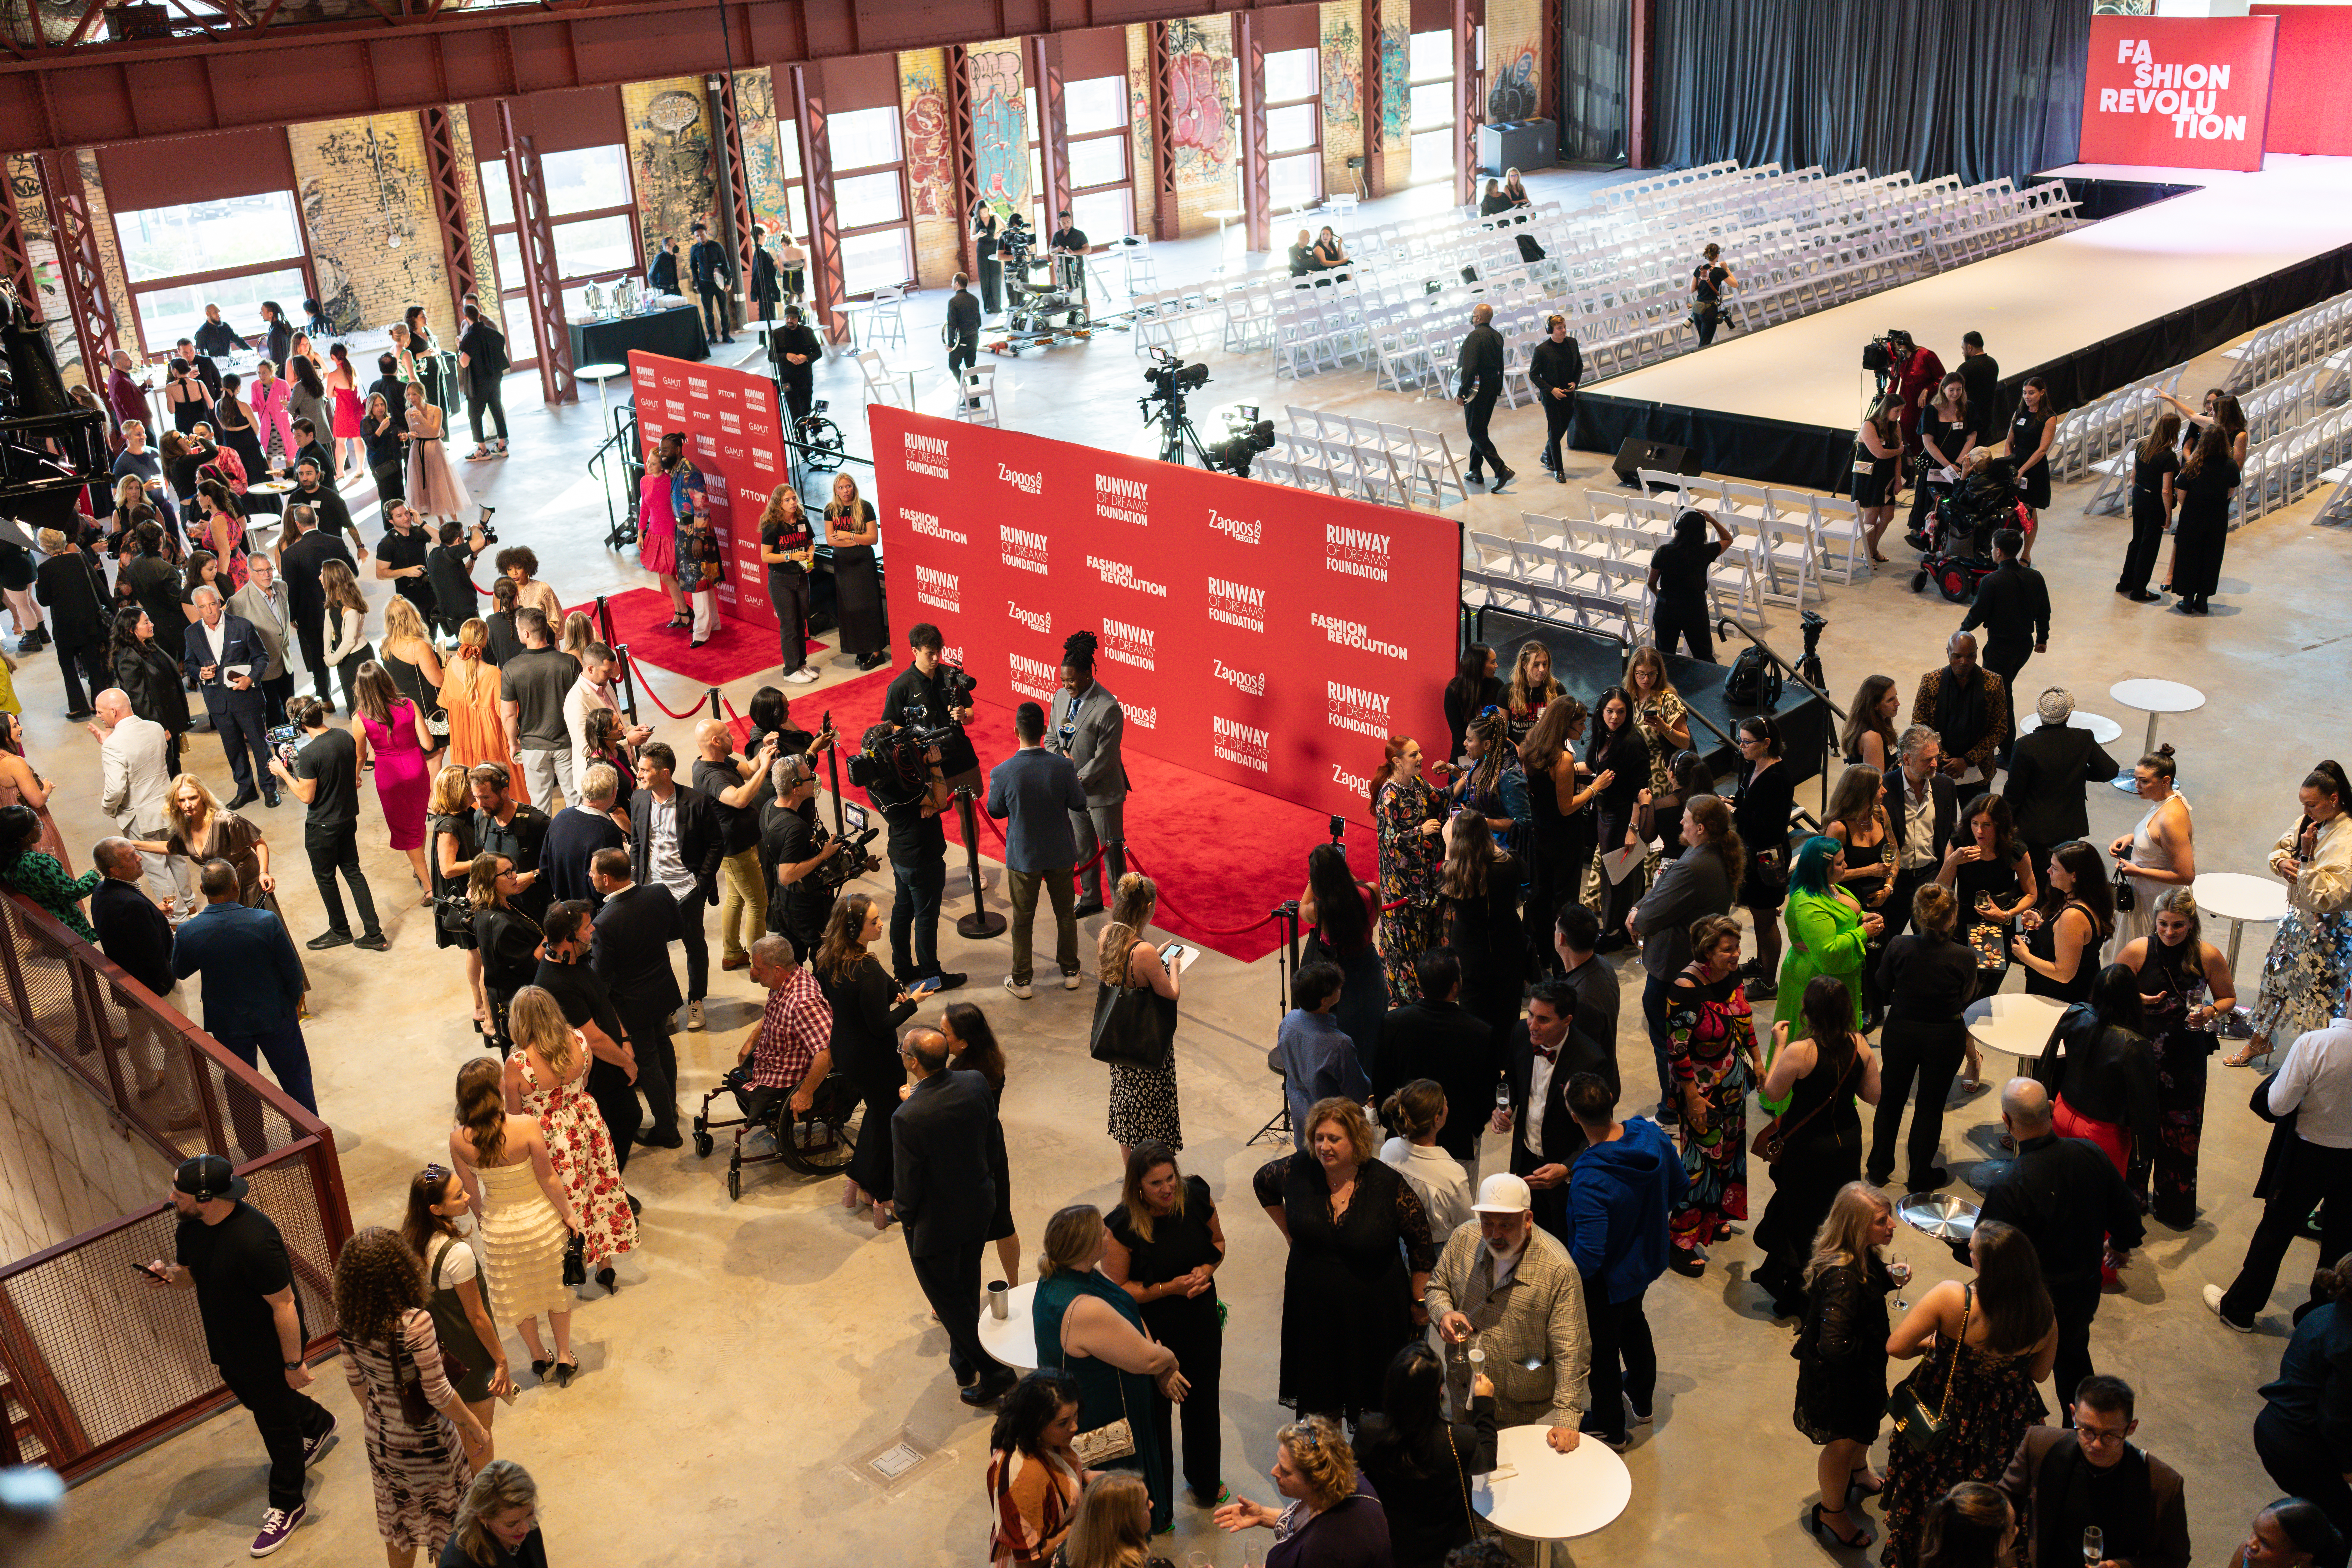 A birds-eye view of models, staff, and guests on the red carpet in front of the stage.